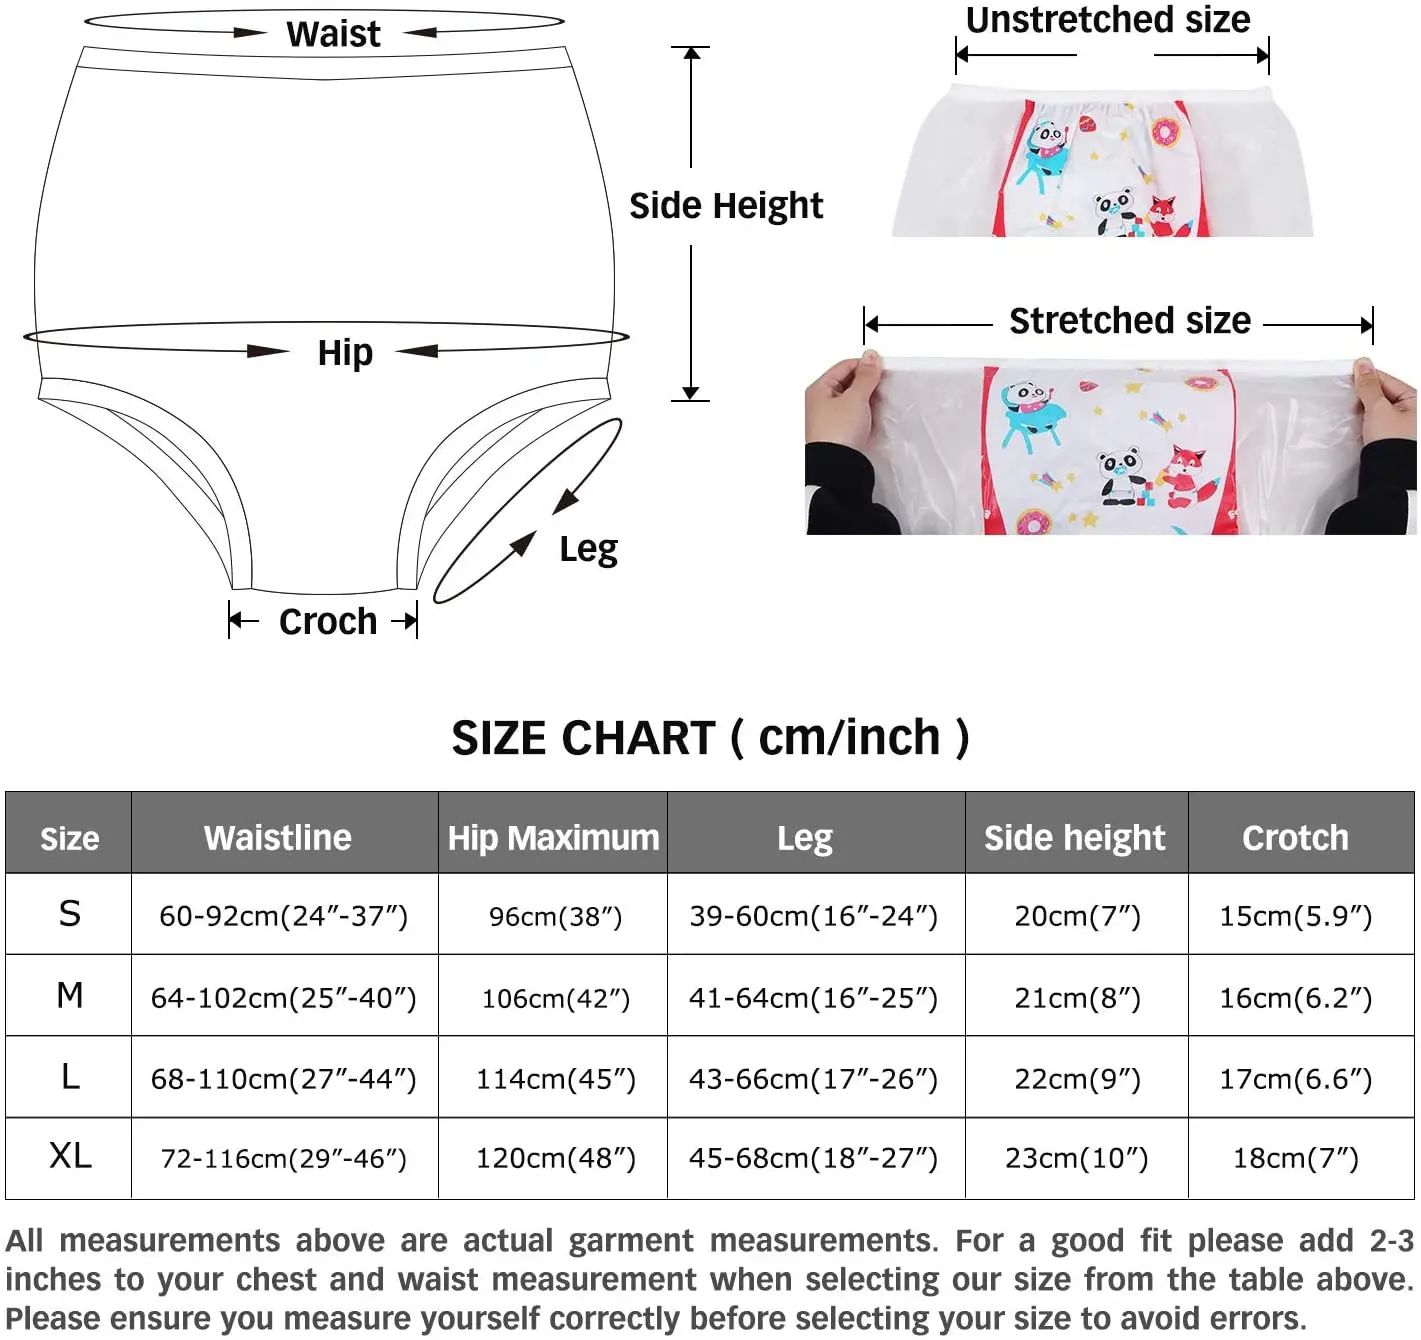 2PCS Dadious abdl adult baby diapers panties incontinence elastic band plastic reusable pants ddlg Red PVC men's Diapers panties images - 6